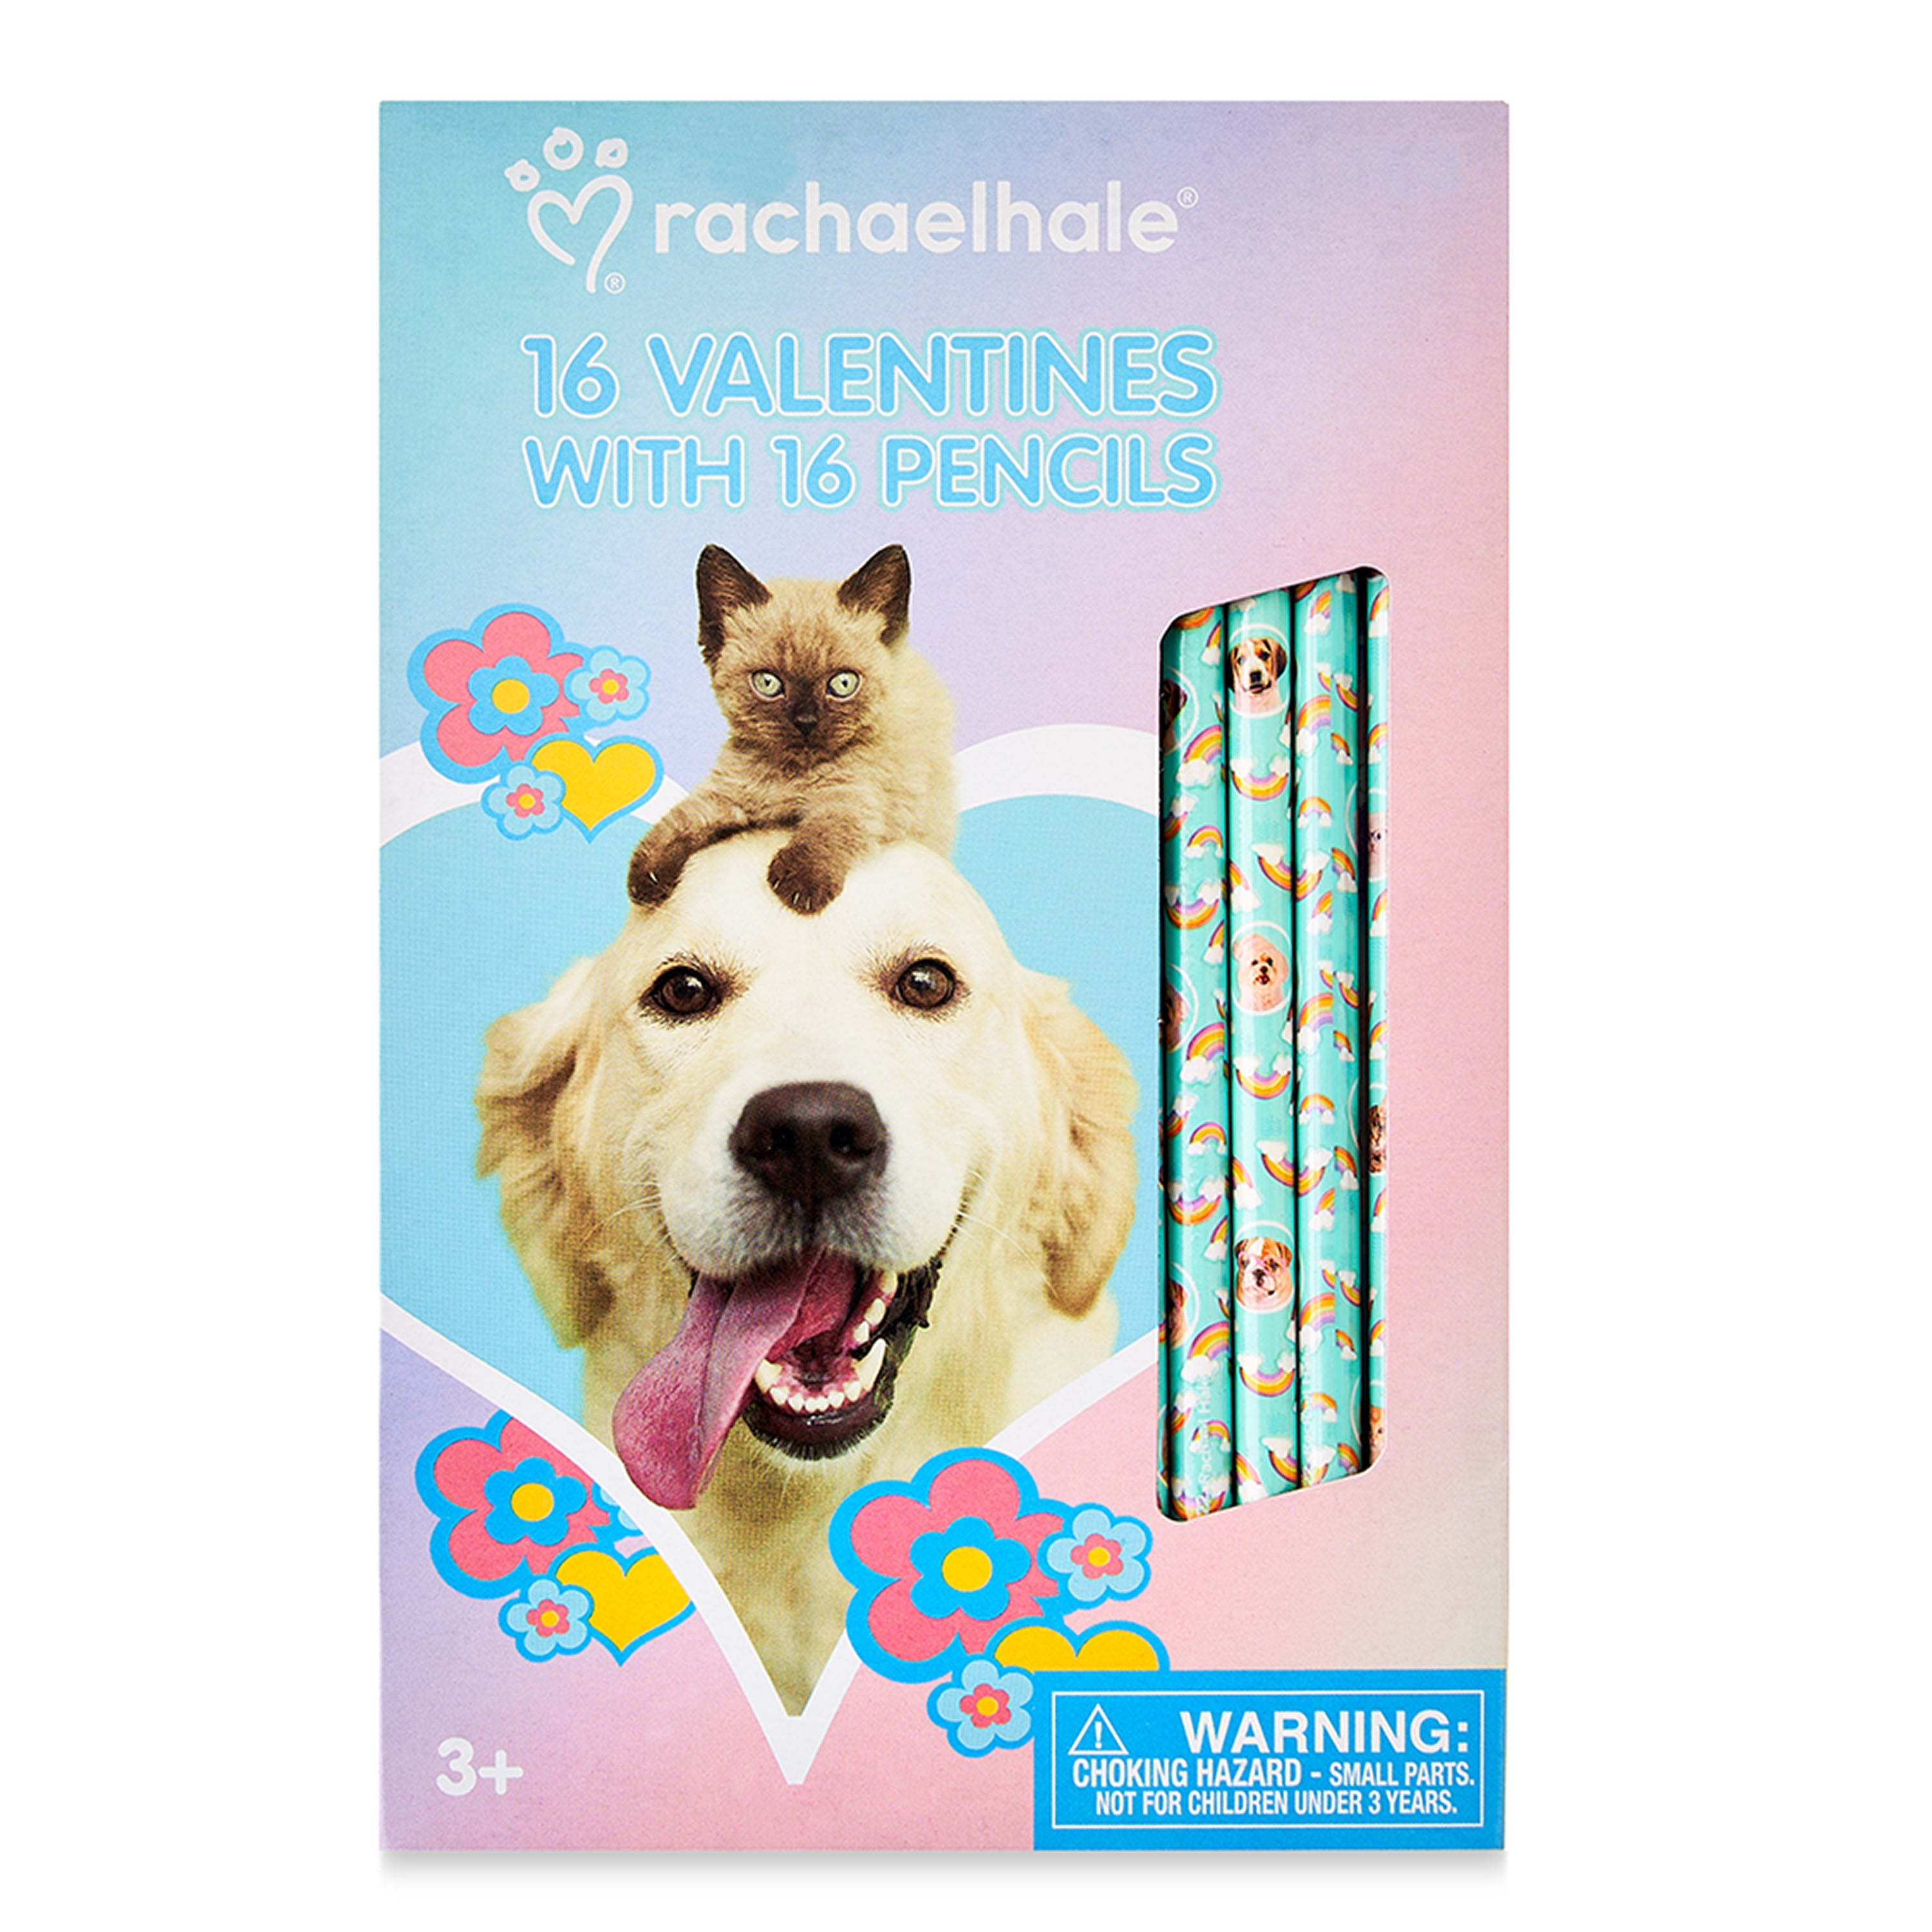 Way To Celebrate Rachael Hale Valentine's Day Cards, 16 Count, Multi-Color Classroom Exchange Cards, 16 Full Size Pencils